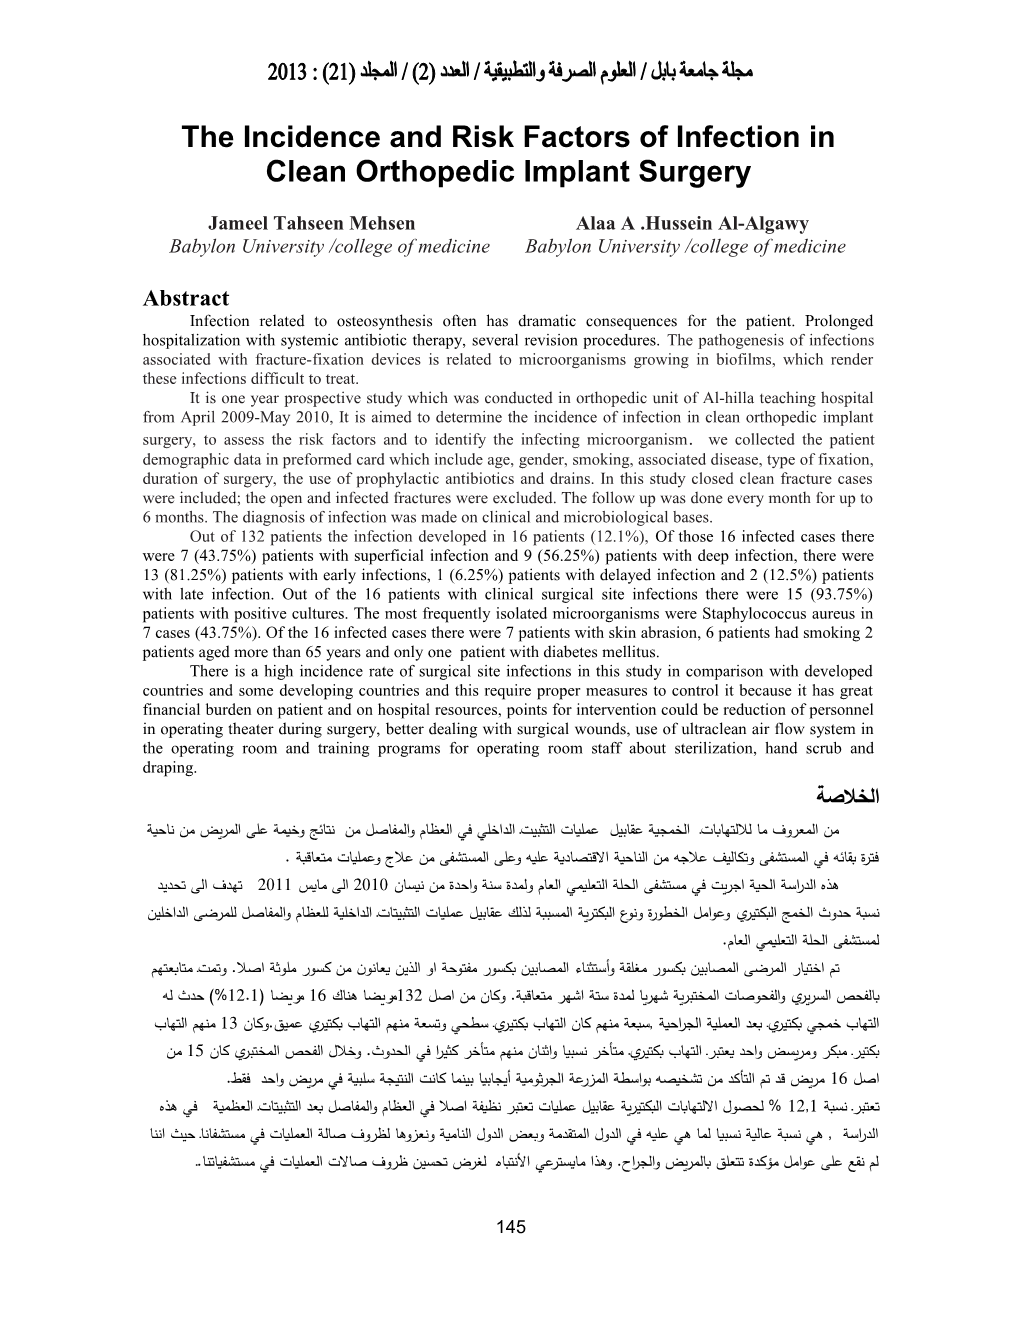 The Incidence and Risk Factors of Infection Incleanorthopedic Implant Surgery